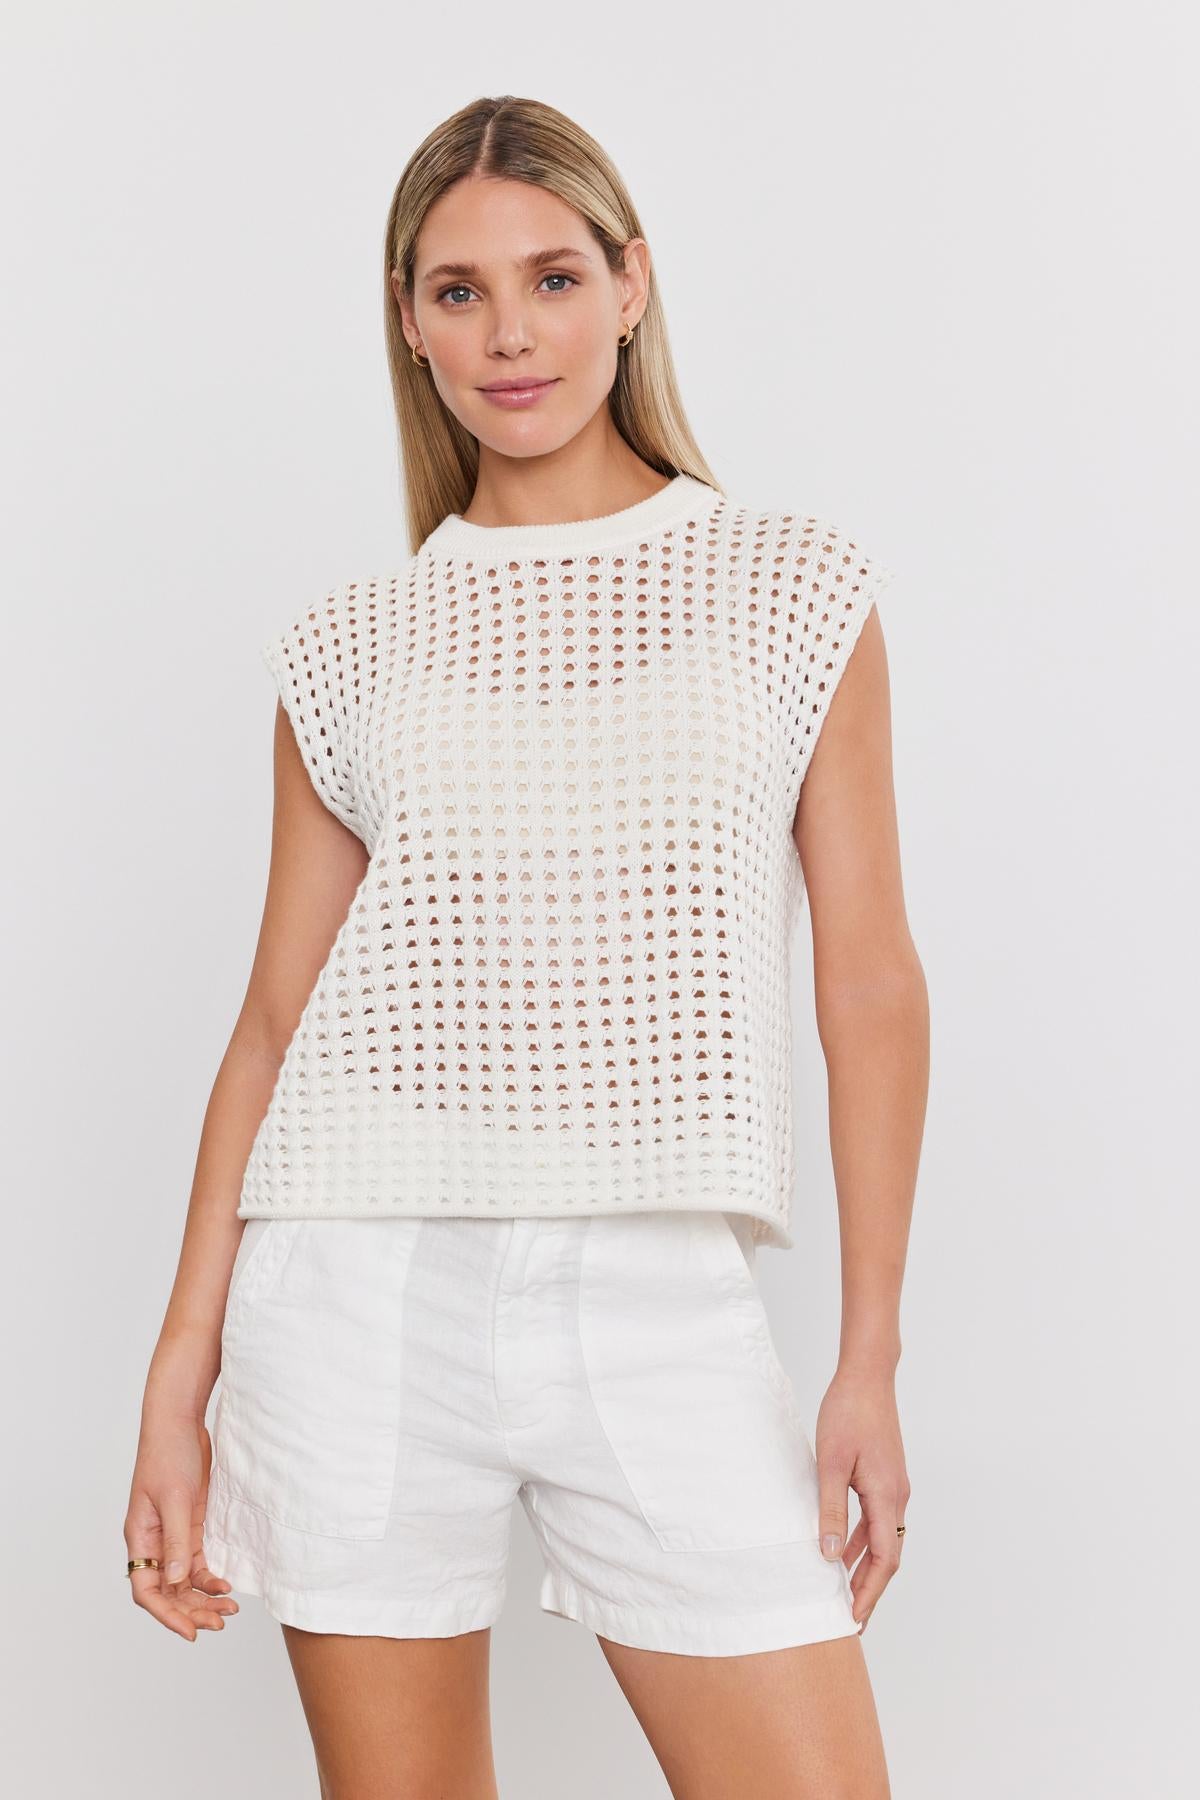 A woman with long blonde hair, wearing the MAISON SWEATER by Velvet by Graham & Spencer and white shorts, stands against a plain white background, showcasing her chic cropped silhouette.-37162037674177